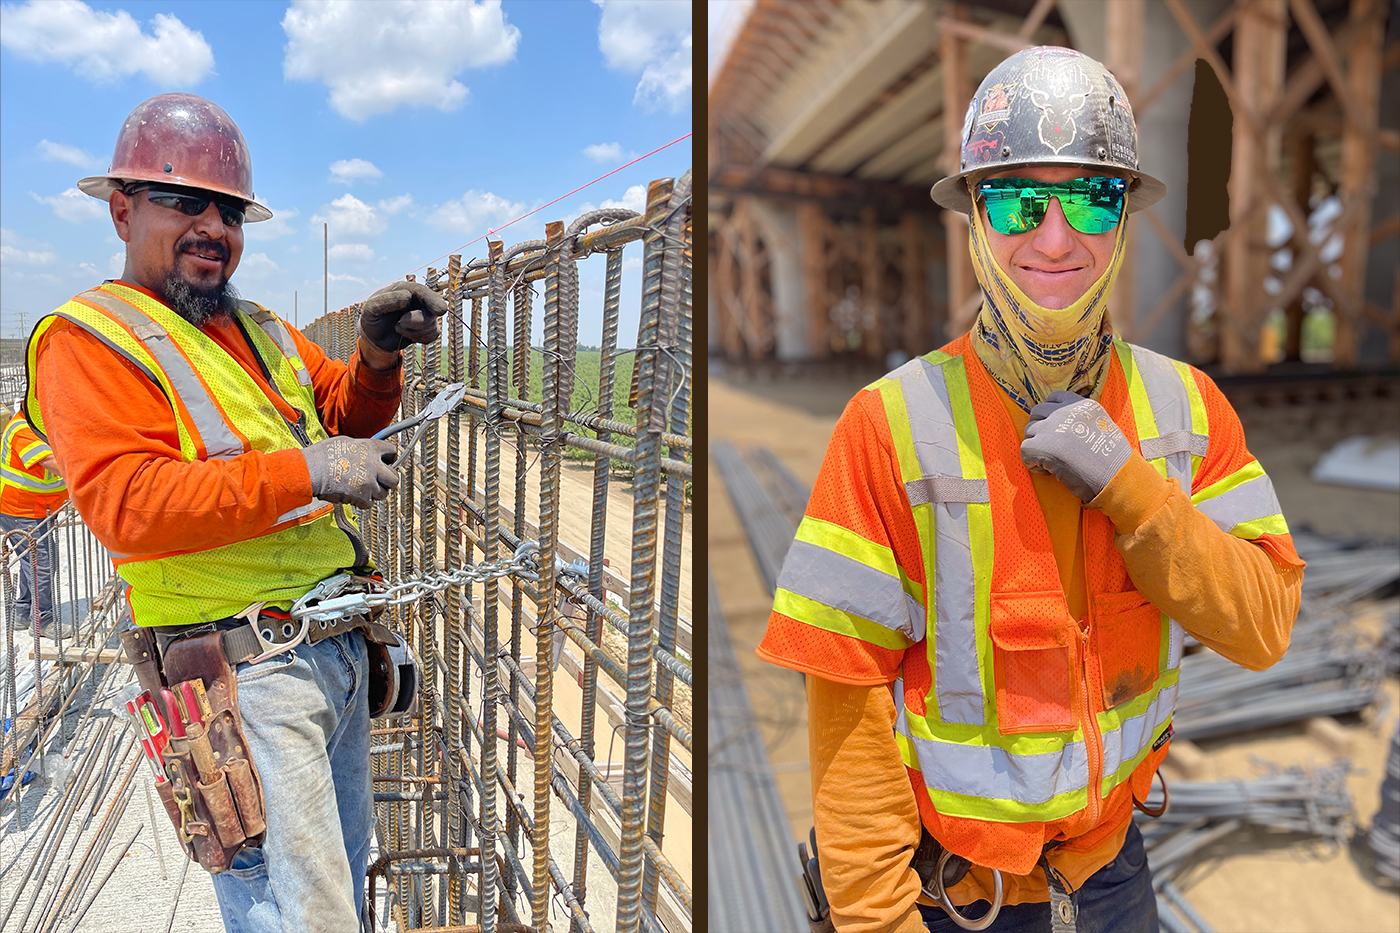 Hanford Viaduct construction workers taking a quick moment for a portrait and then back to work building the nation's first high-speed rail project!